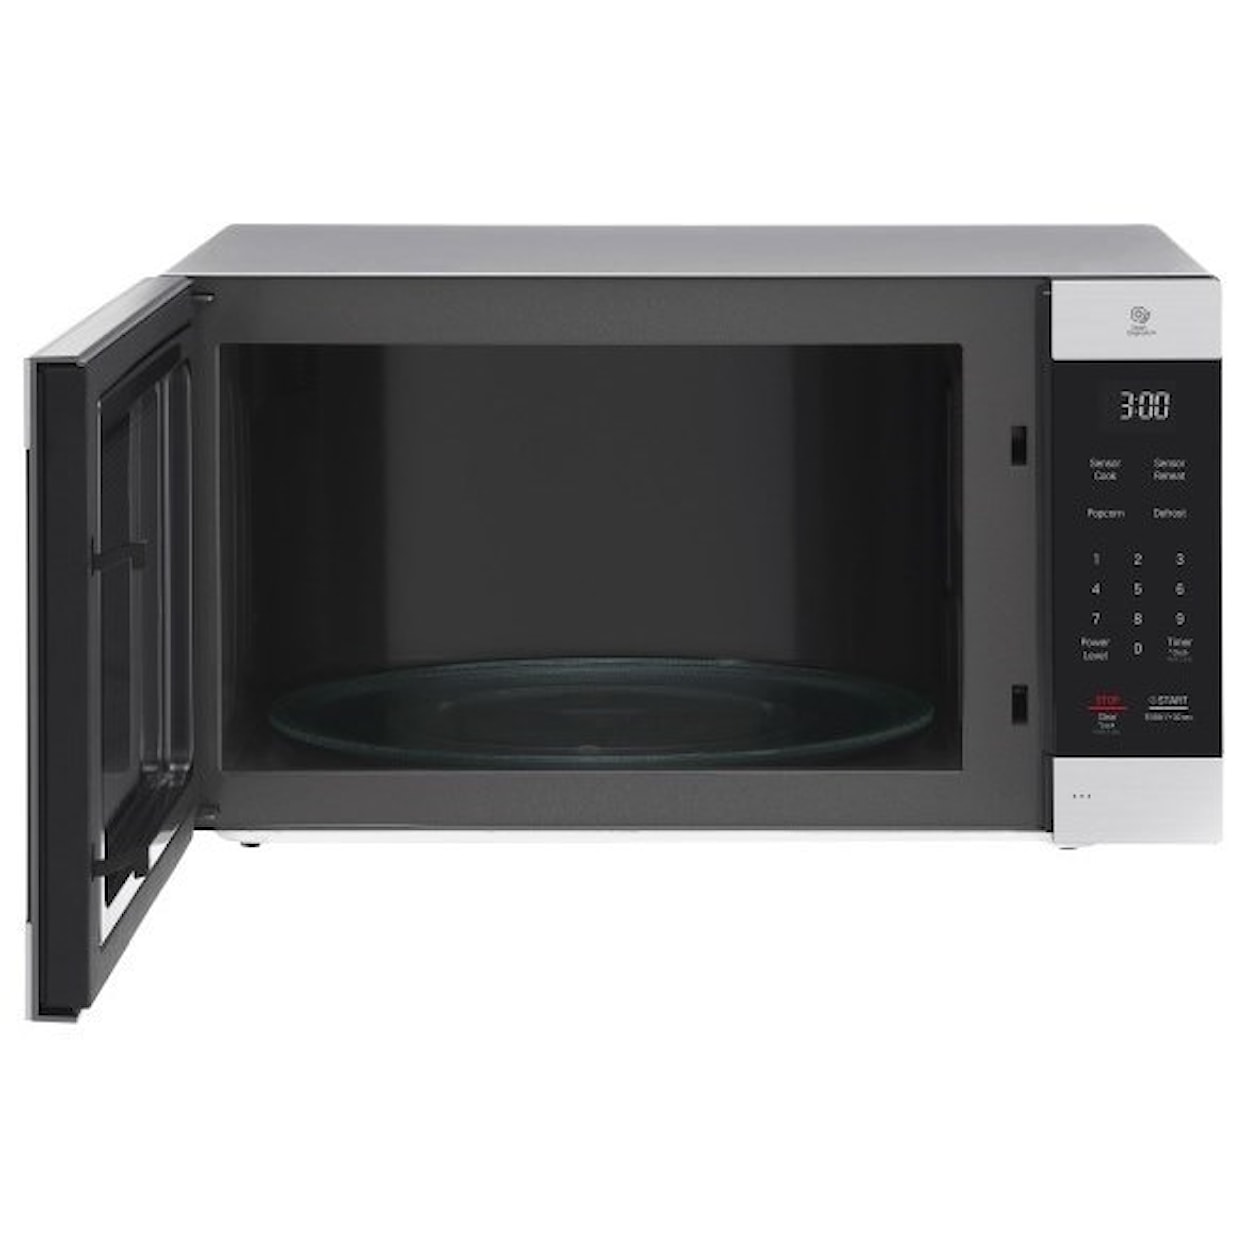 LG Appliances Microwaves 2.0 cu. ft. NeoChef™ Countertop Microwave wi